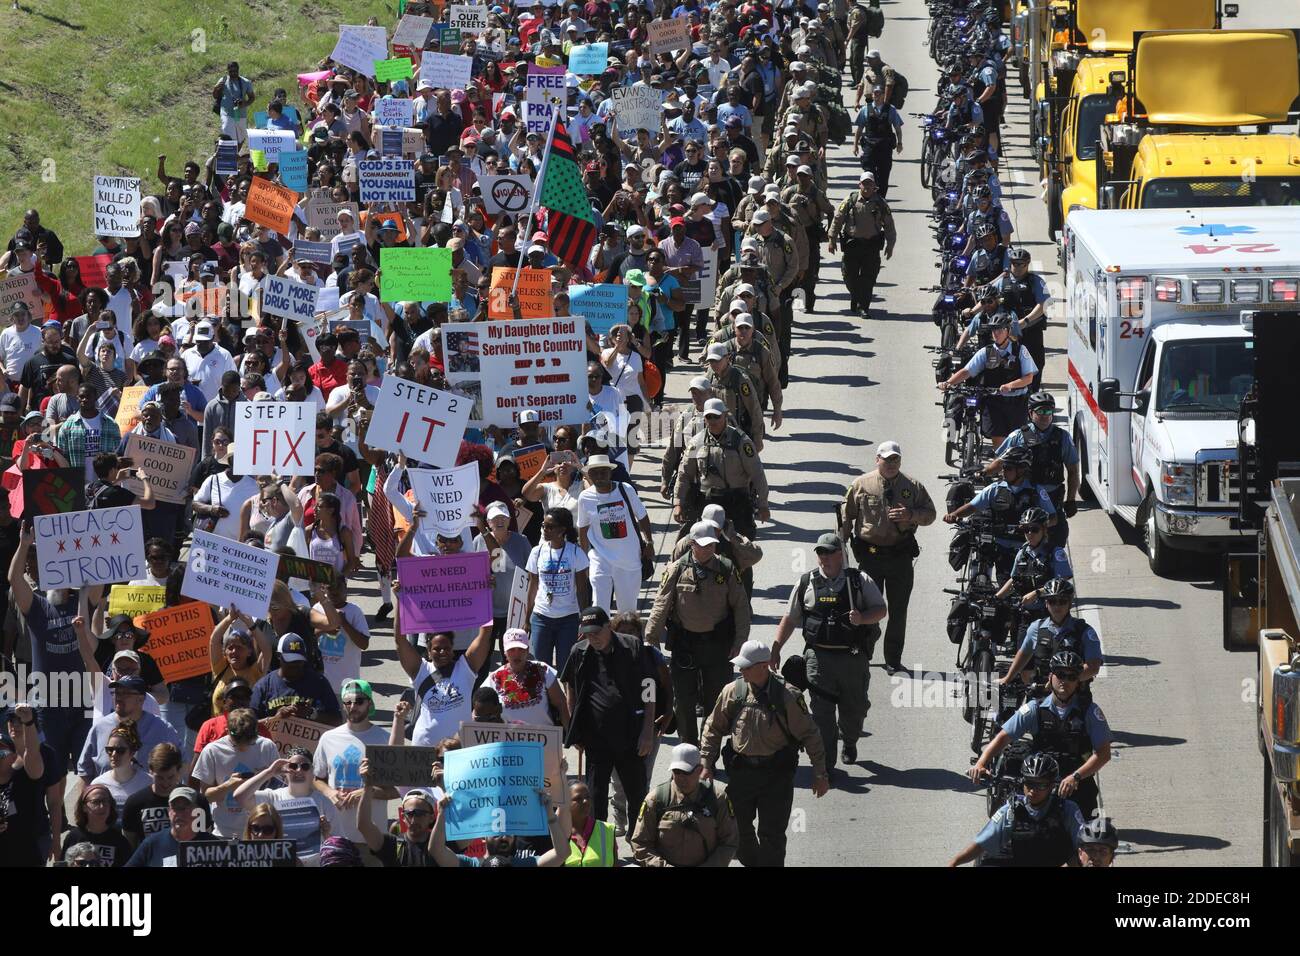 NO FILM, NO VIDEO, NO TV, NO DOCUMENTARY - Thousands of protesters walk north on the Dan Ryan Expressway in Chicago, IL, USA after blocking the transportation artery in an anti-violence march on Saturday, July 7, 2018. Photo by John J. Kim/Chicago Tribune/TNS/ABACAPRESS.COM Stock Photo